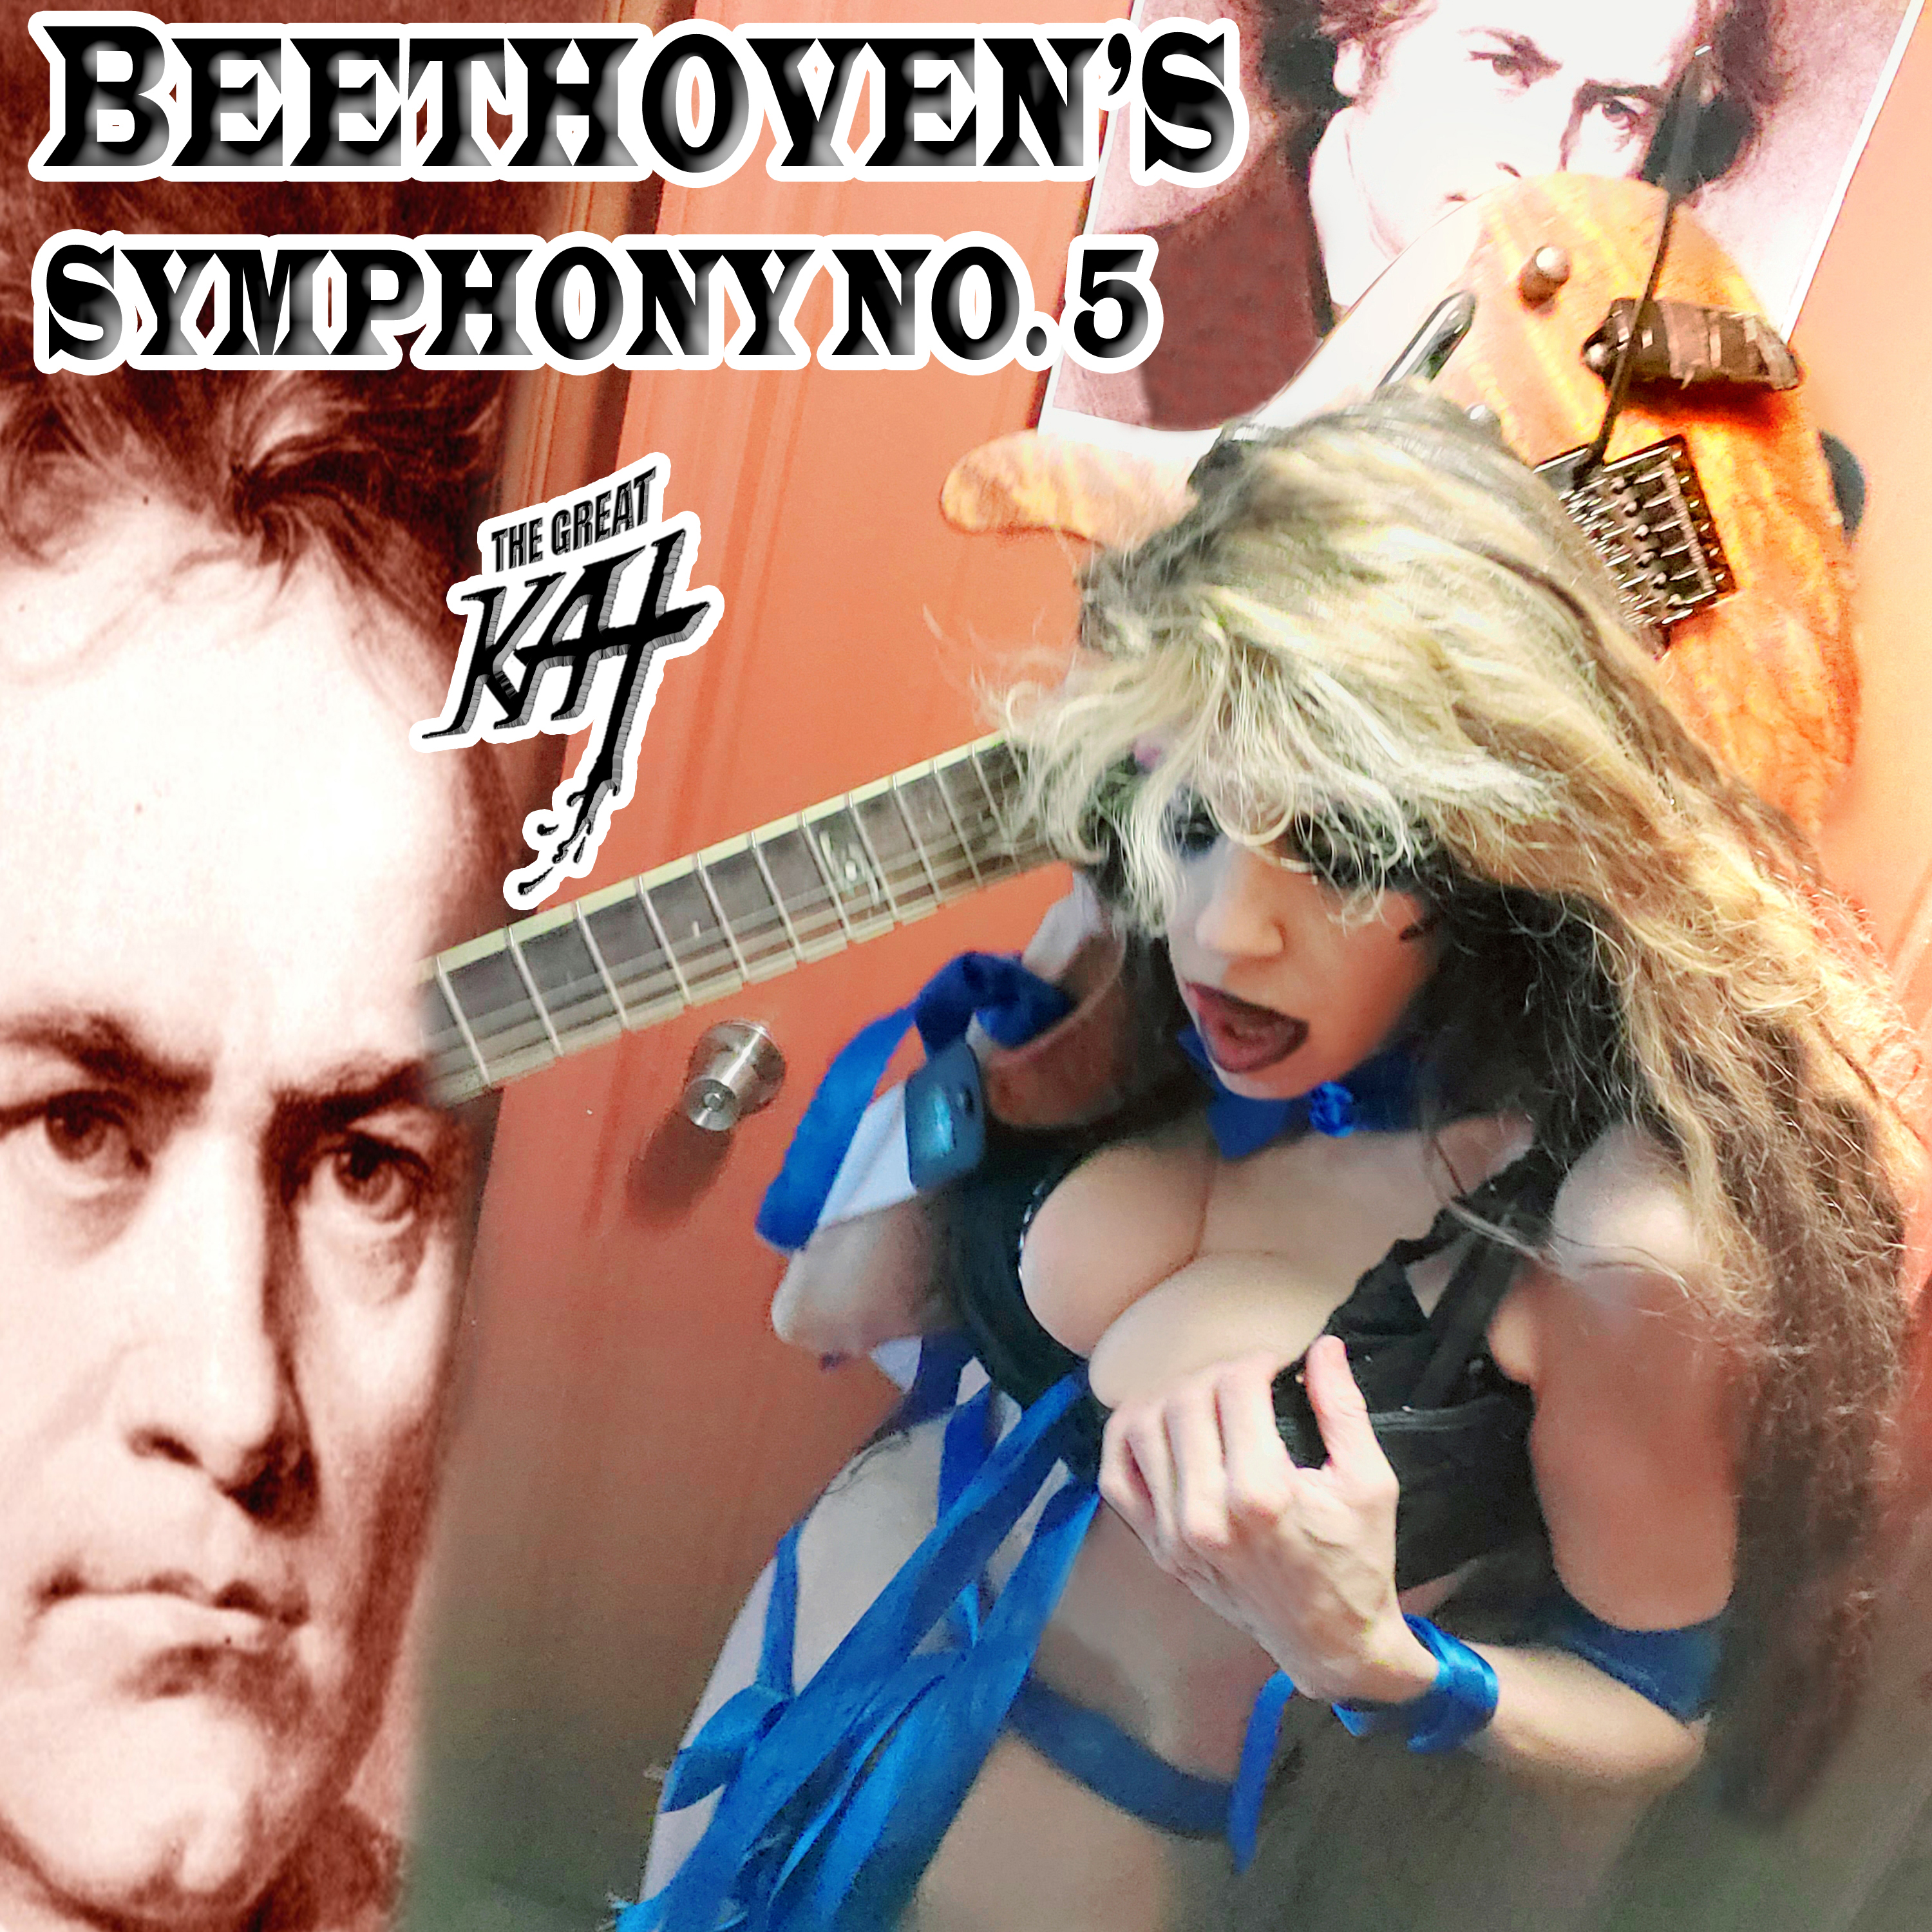 WORLD PREMIERE of BEETHOVENS SYMPHONY NO 5 by THE GREAT KAT!